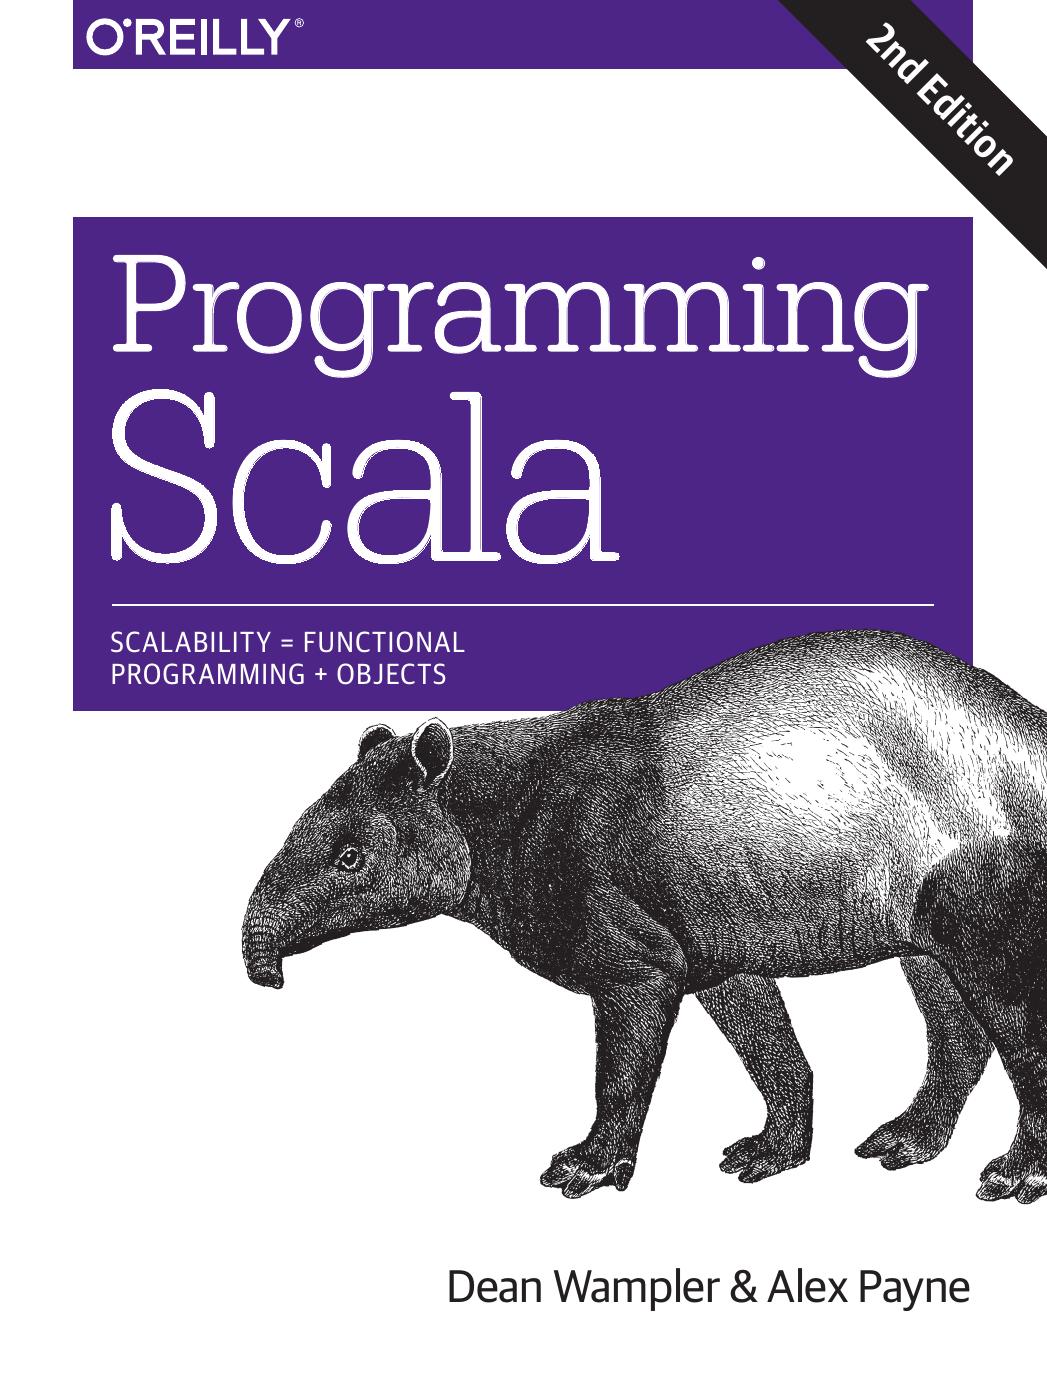 Programming Scala by Dean Wampler and Alex Payne